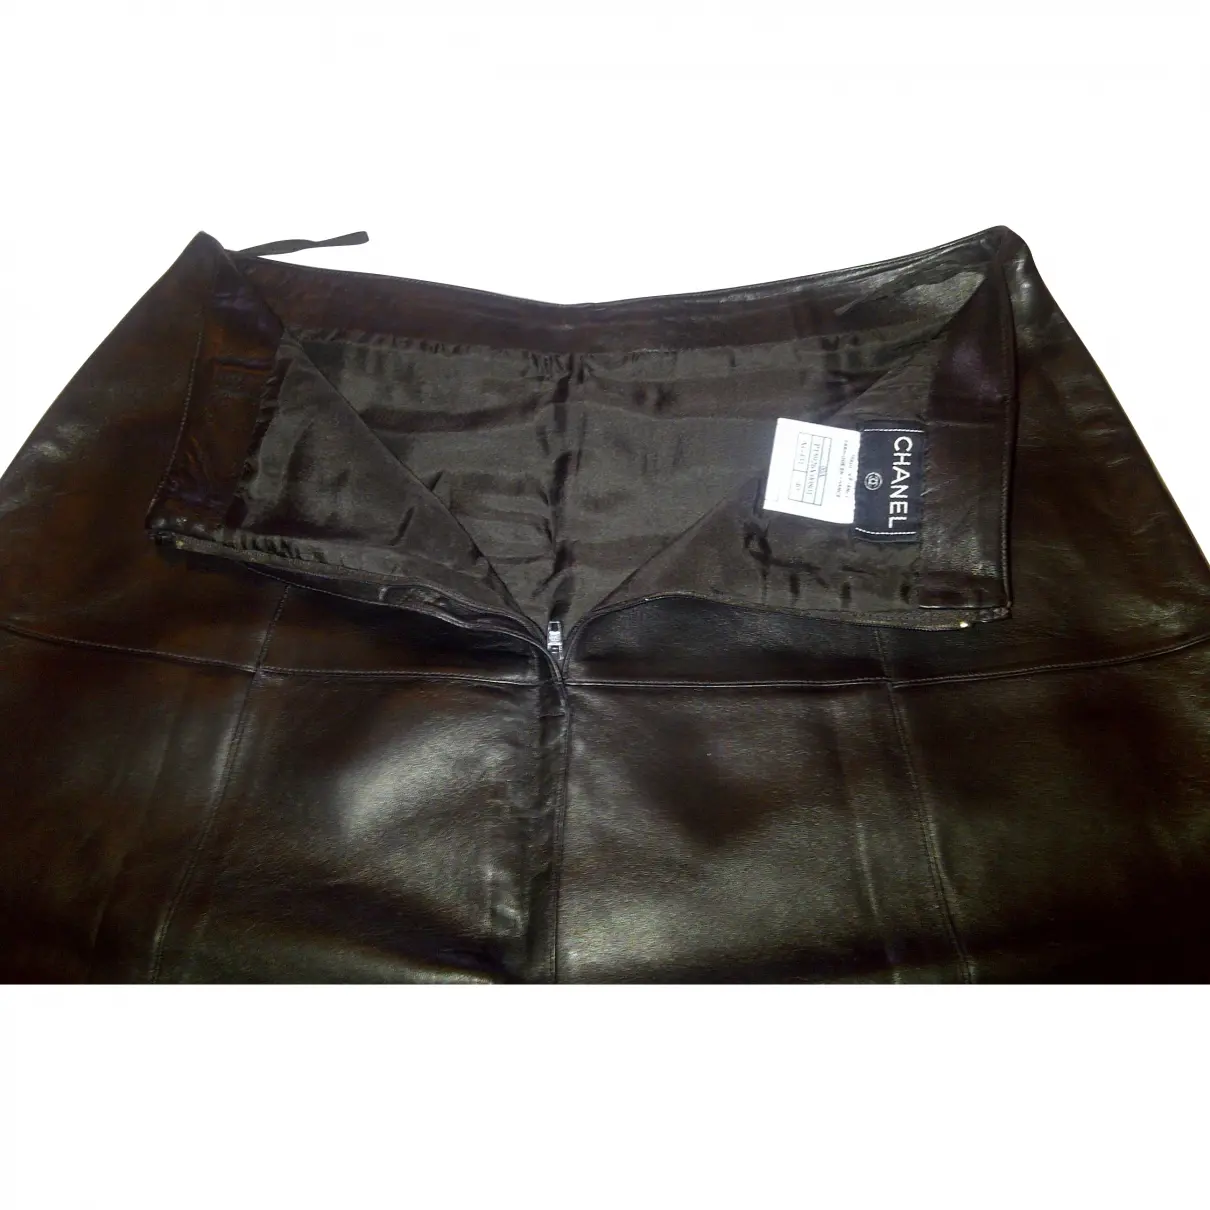 Buy Chanel Brown Leather Skirt online